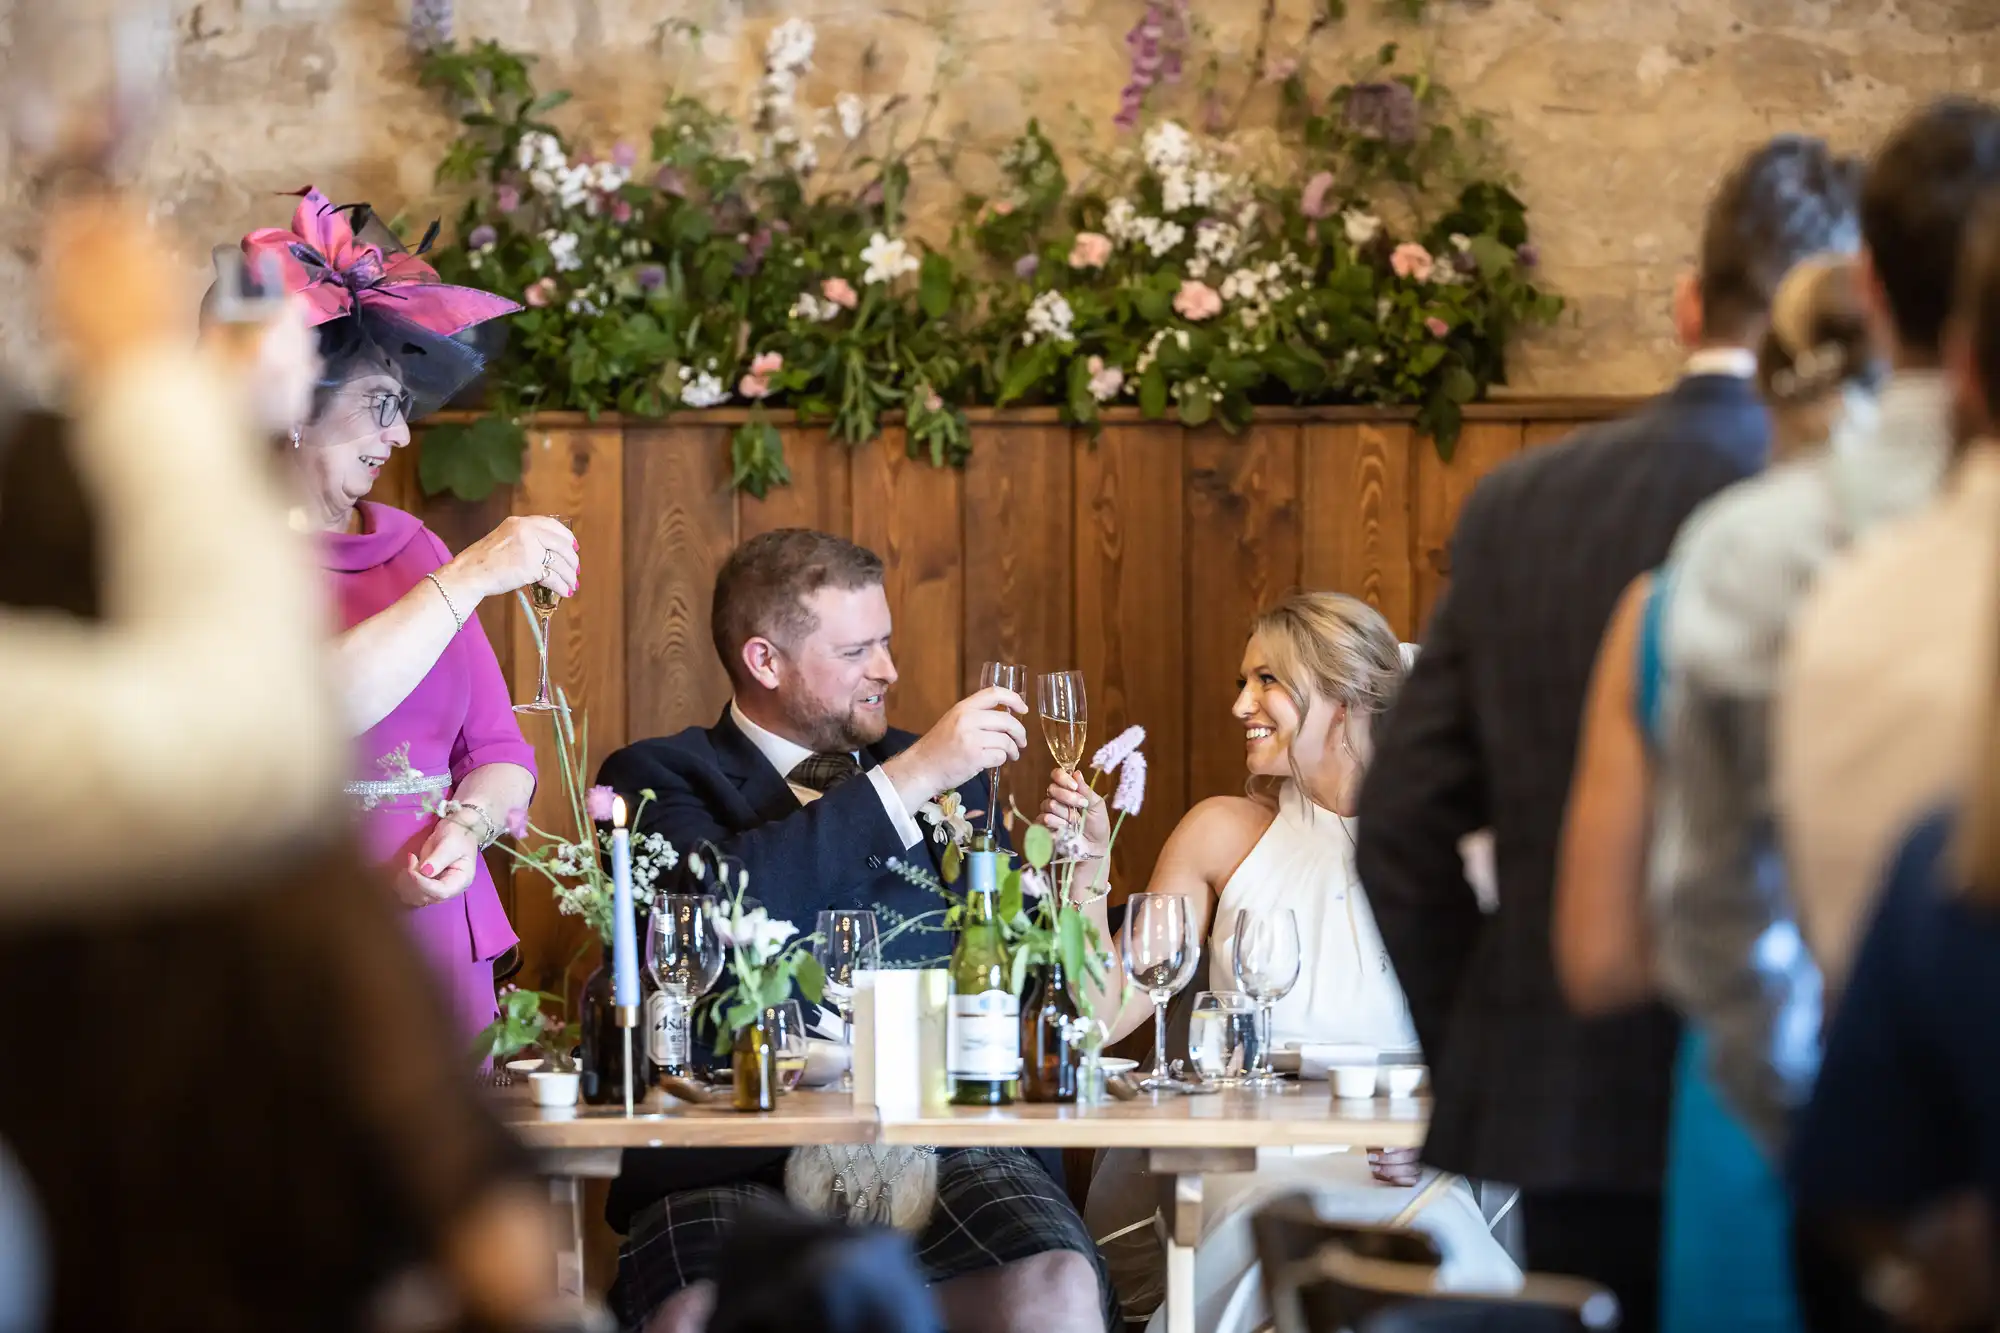 A bride and groom seated at a wedding reception table, smiling and toasting, with guests and floral decorations around them.